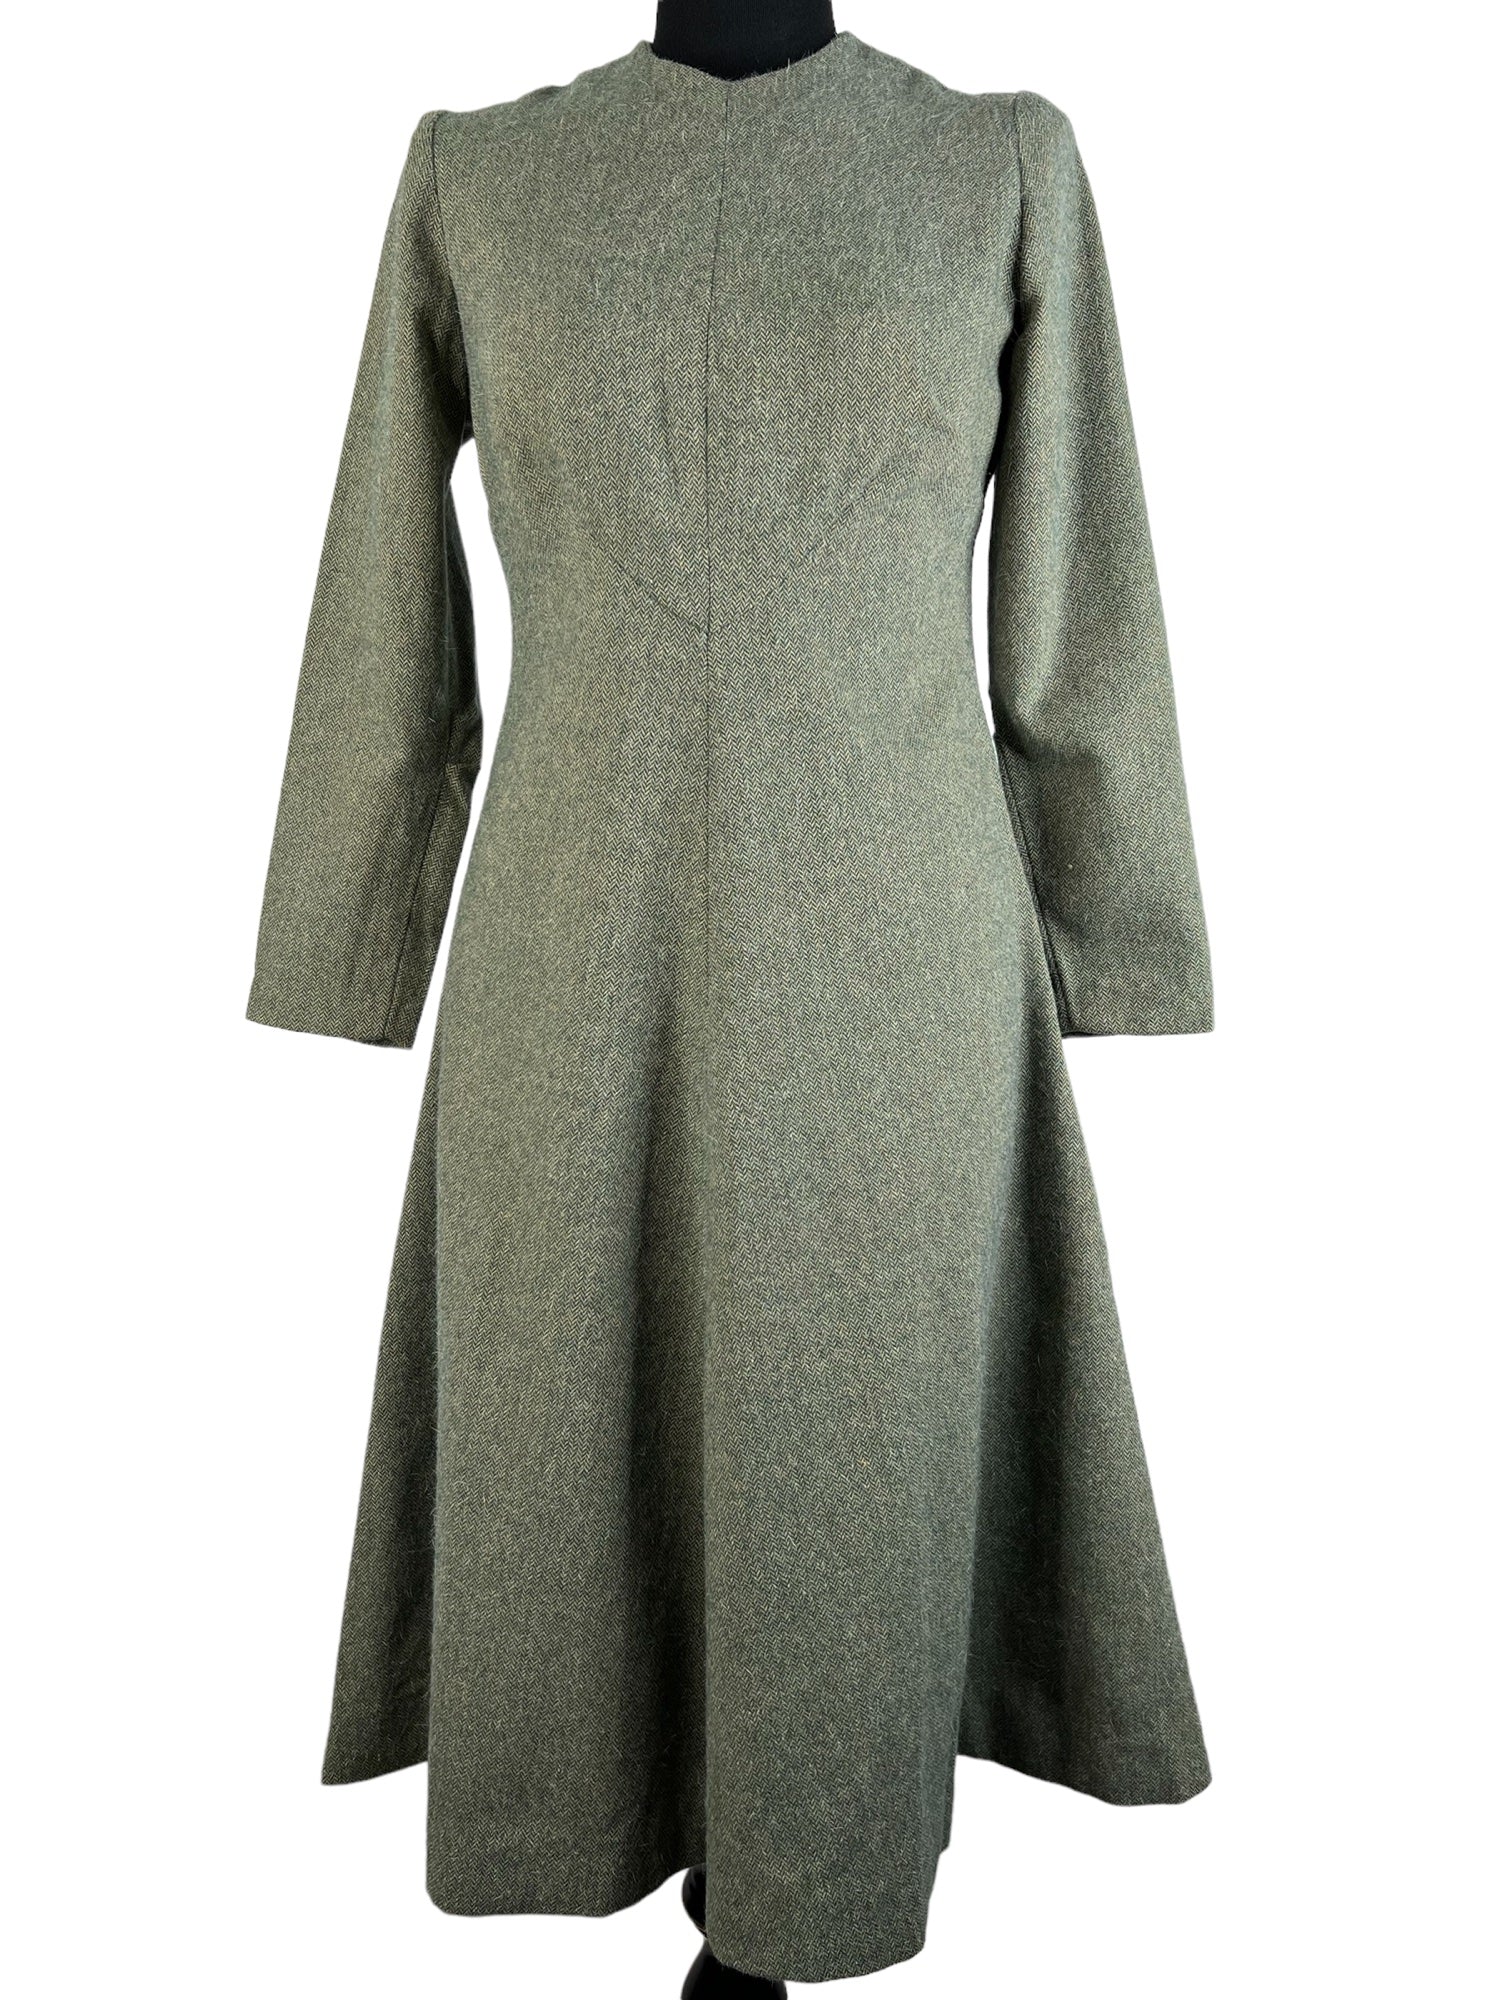 wool  womens  vintage  tweed  style  retro  patterned dress  patterned  ladies  herringbone tweed  Green  fitted  fashion  dress  clothing  clothes  brown  back zip  autumnal  autumn dress  autumn  60s  1960s  10